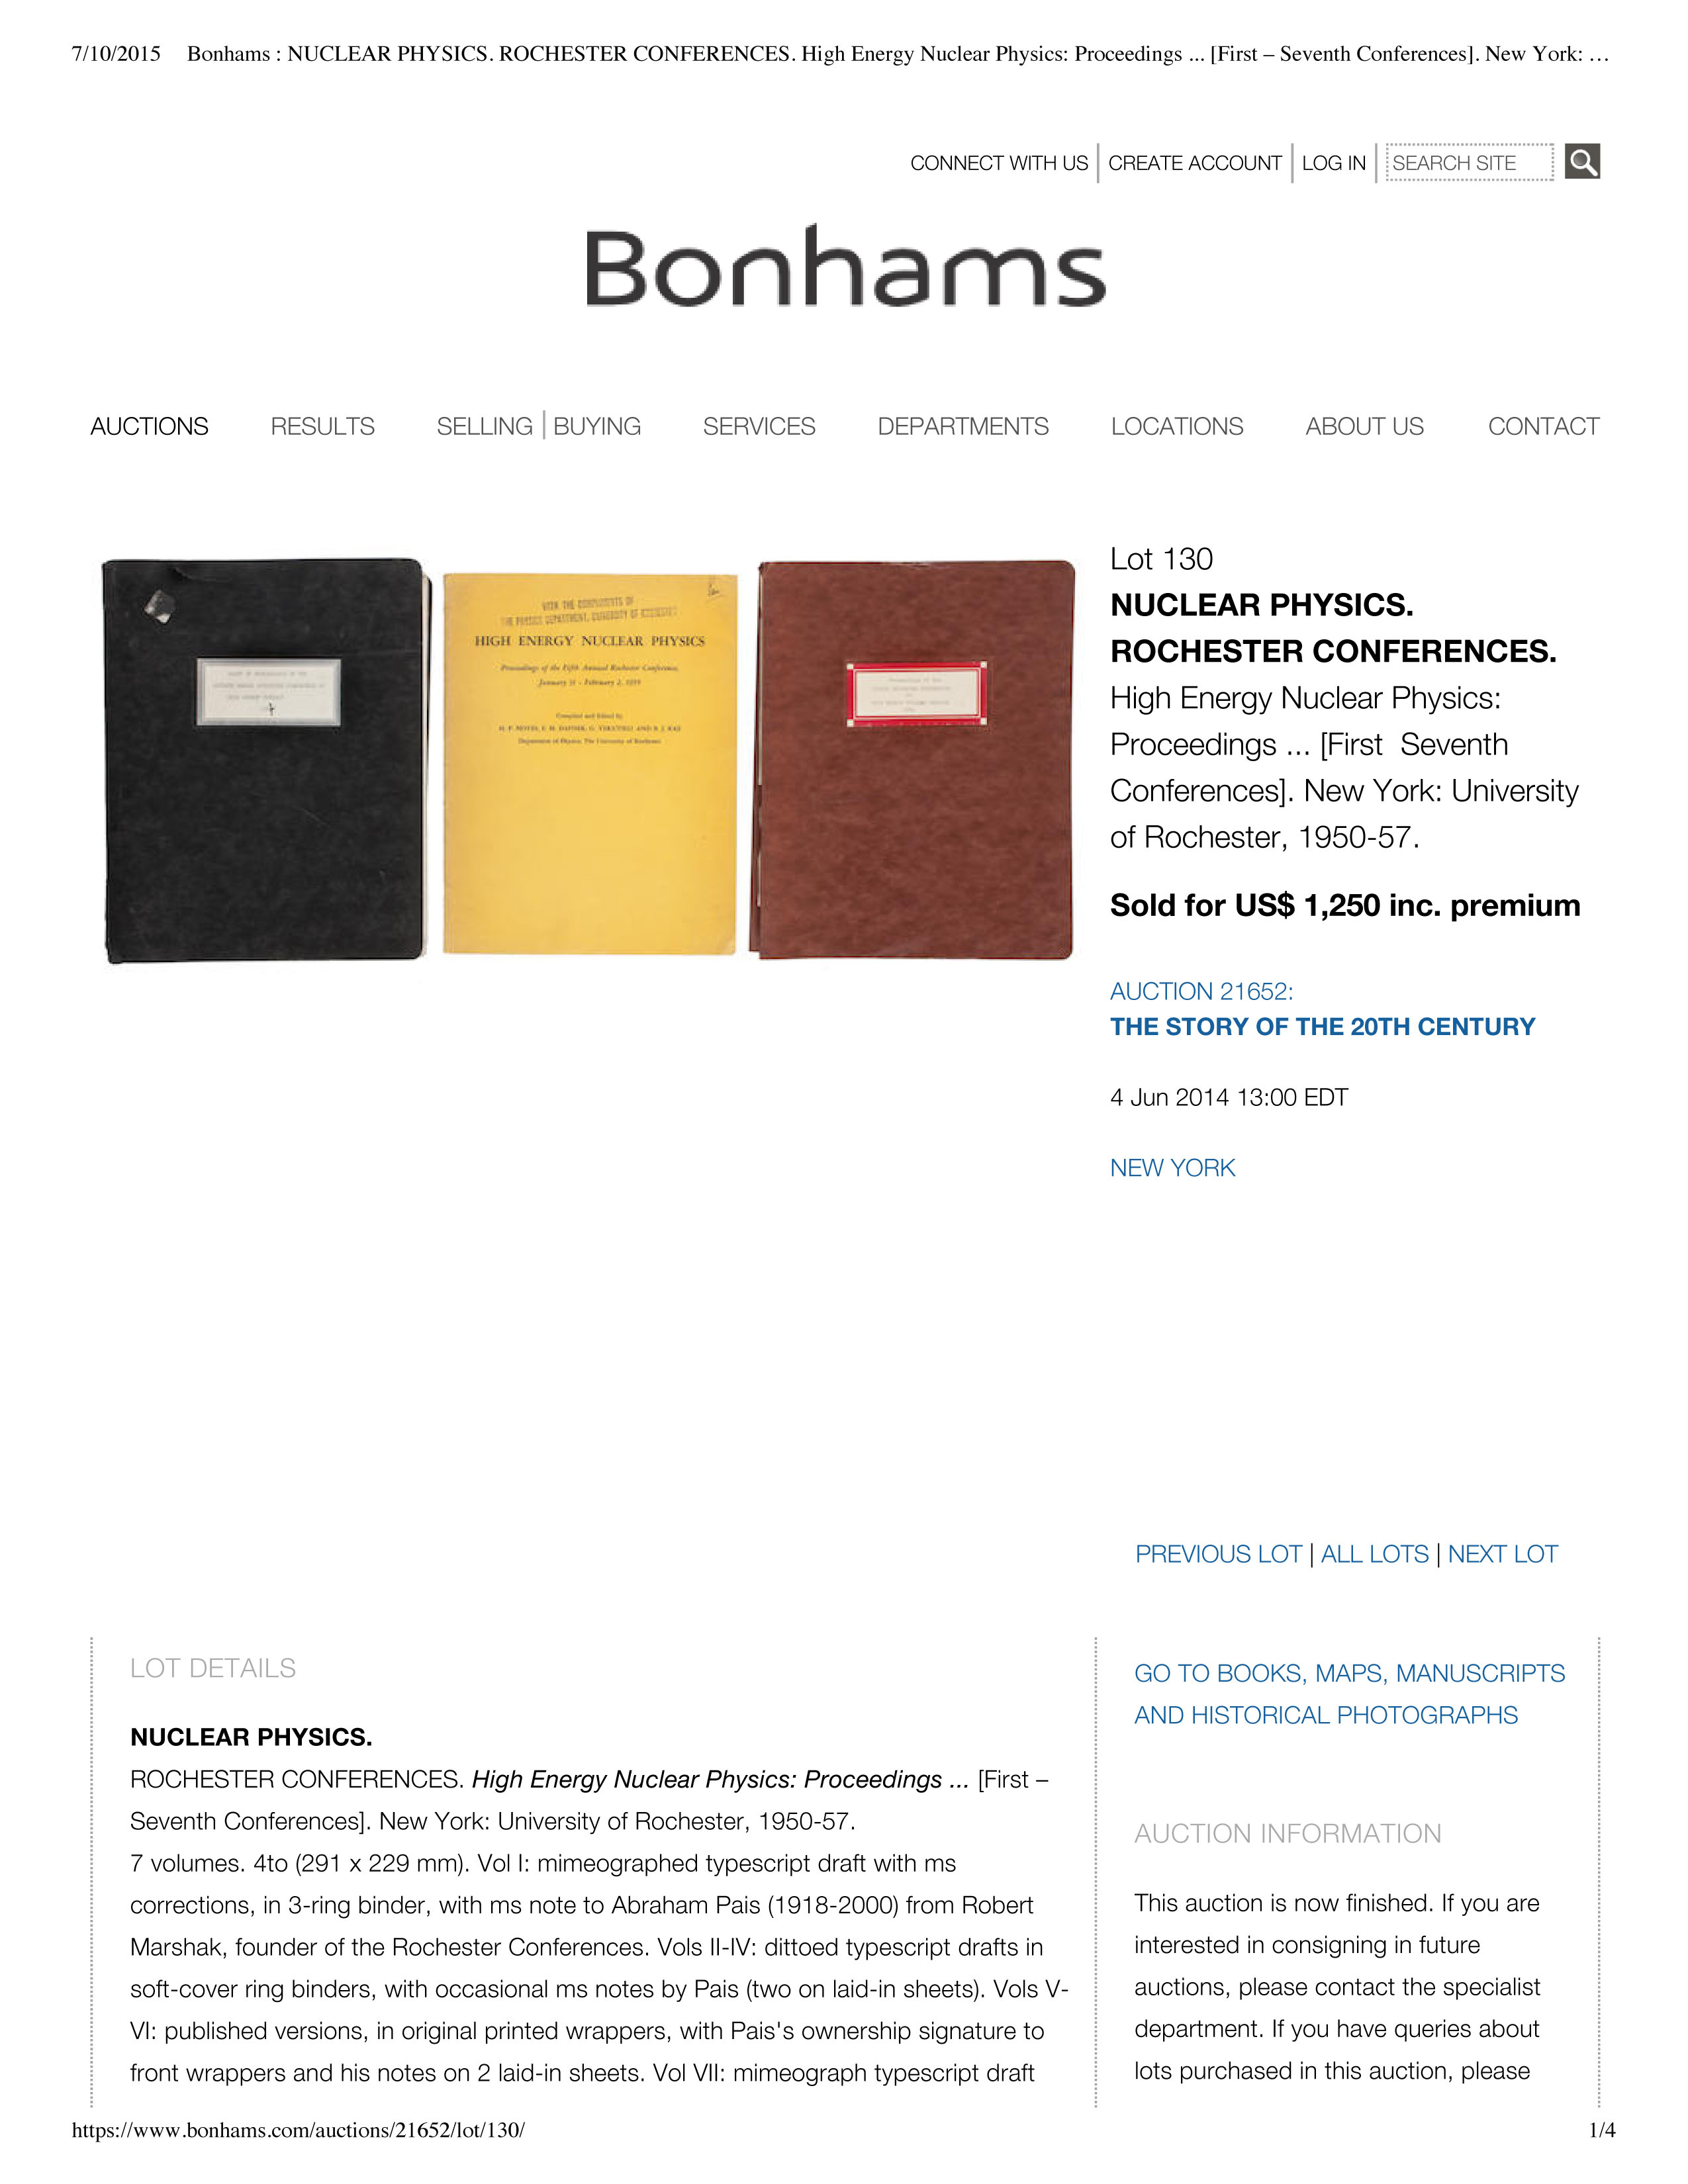 Nuclear Physics, Rochester Conferences: Bonhams Auctioneers